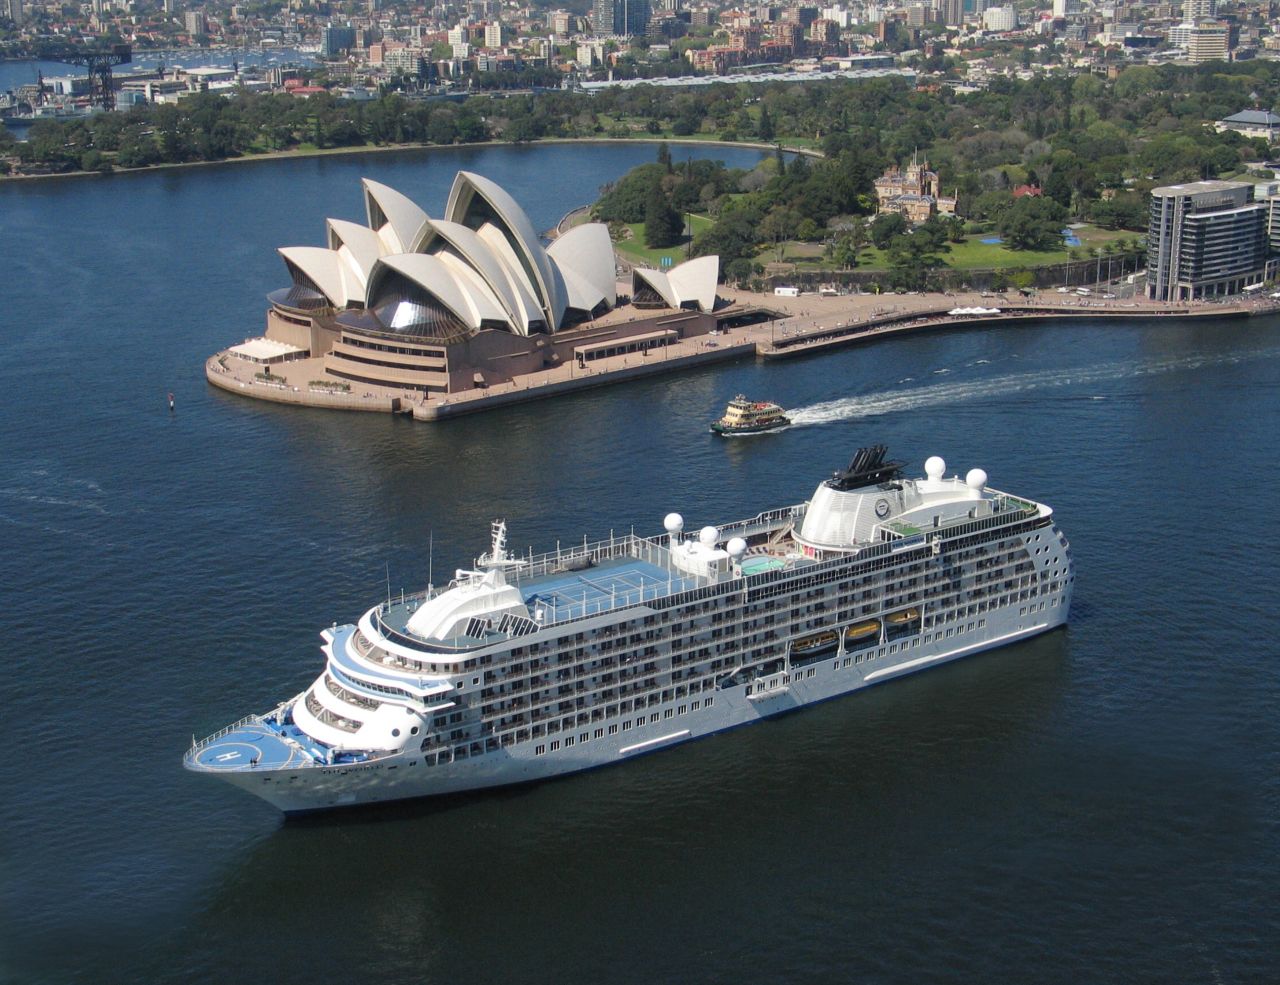 This year, The World has already sailed to Australia and New Zealand, as well islands across the Southern Hemisphere. It is pictured here in Sydney Harbor.